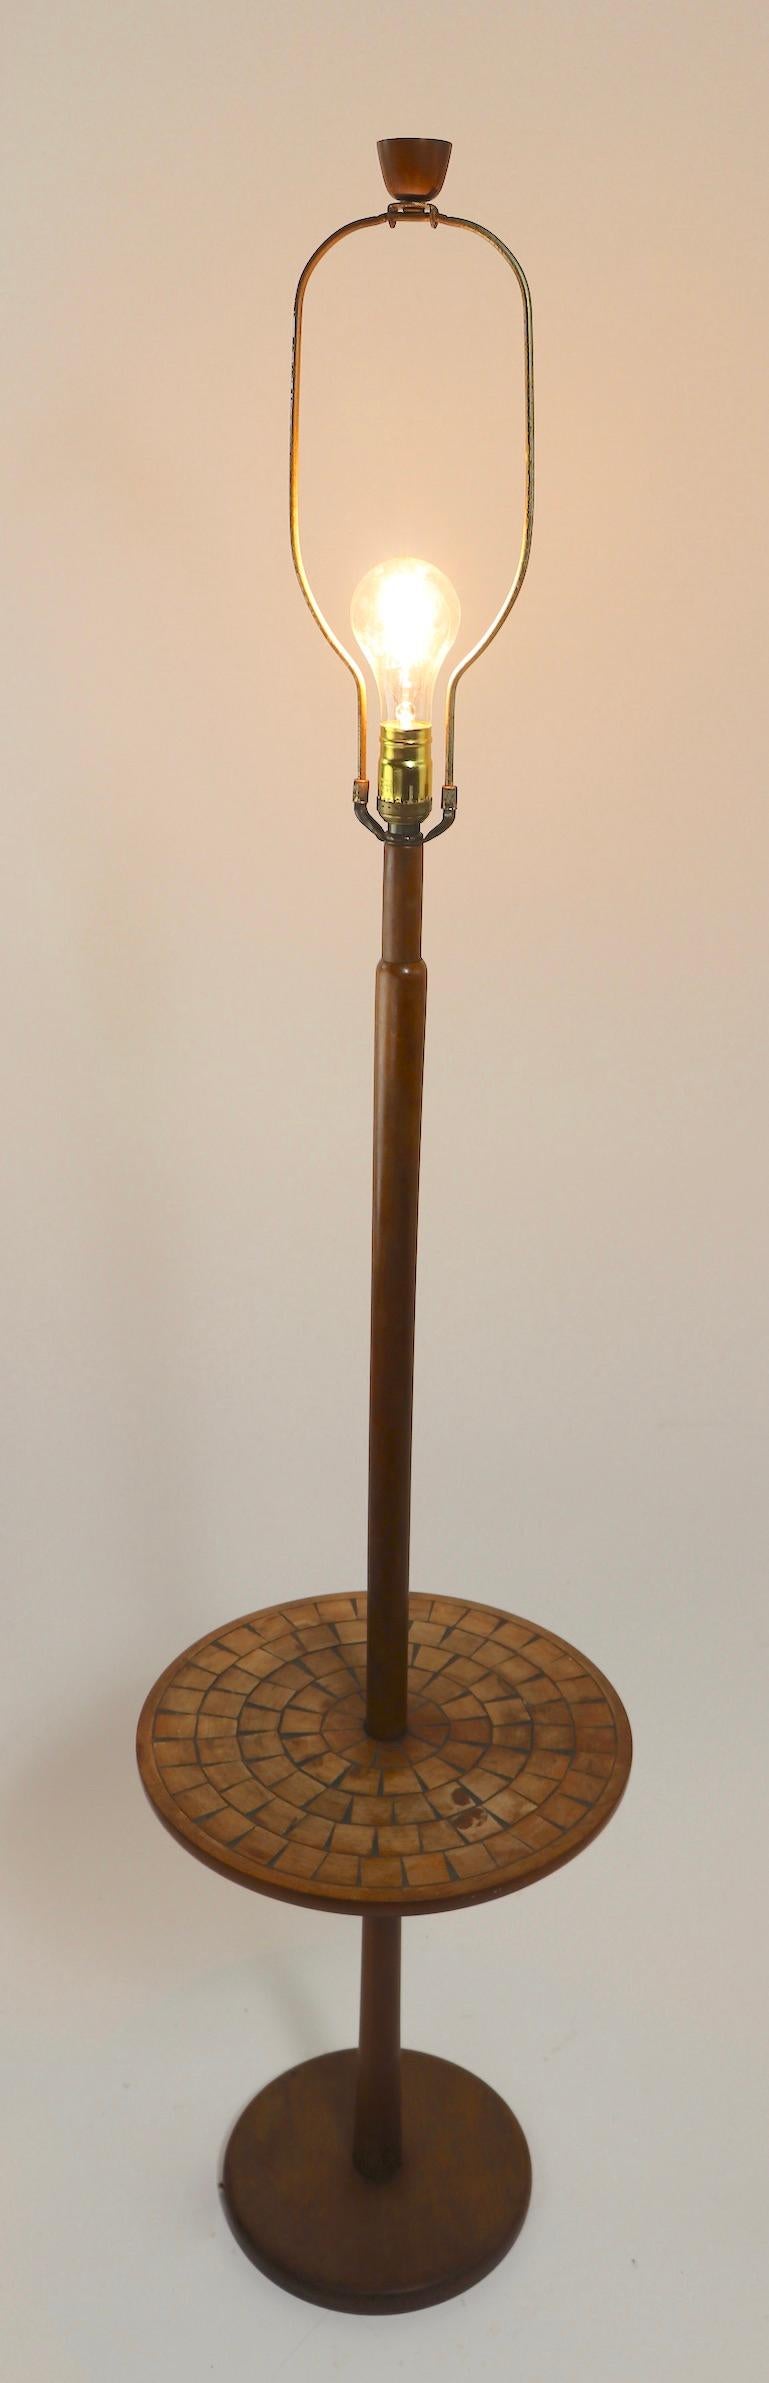 Classic Mid Century floor lamp, with inlayed mosaic style squares of wood radiating out from the center pole on the disk table surface. Nice original, working condition, showing only cosmetic wear to finish, normal and consistent with age. Possibly